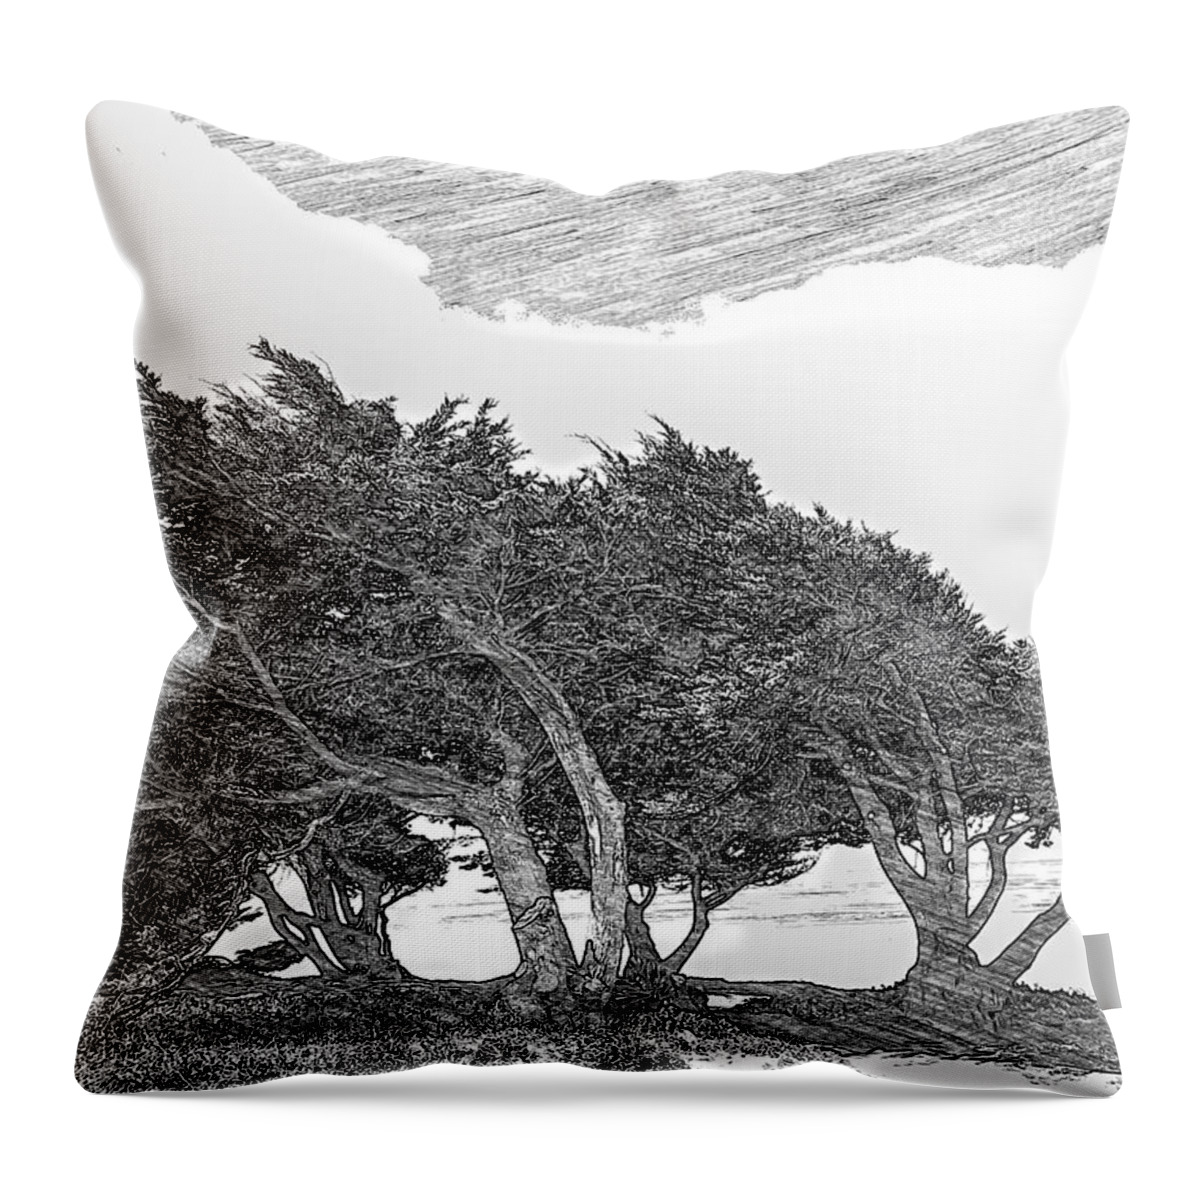 Abstract Throw Pillow featuring the digital art Cypresses by Jonathan Nguyen